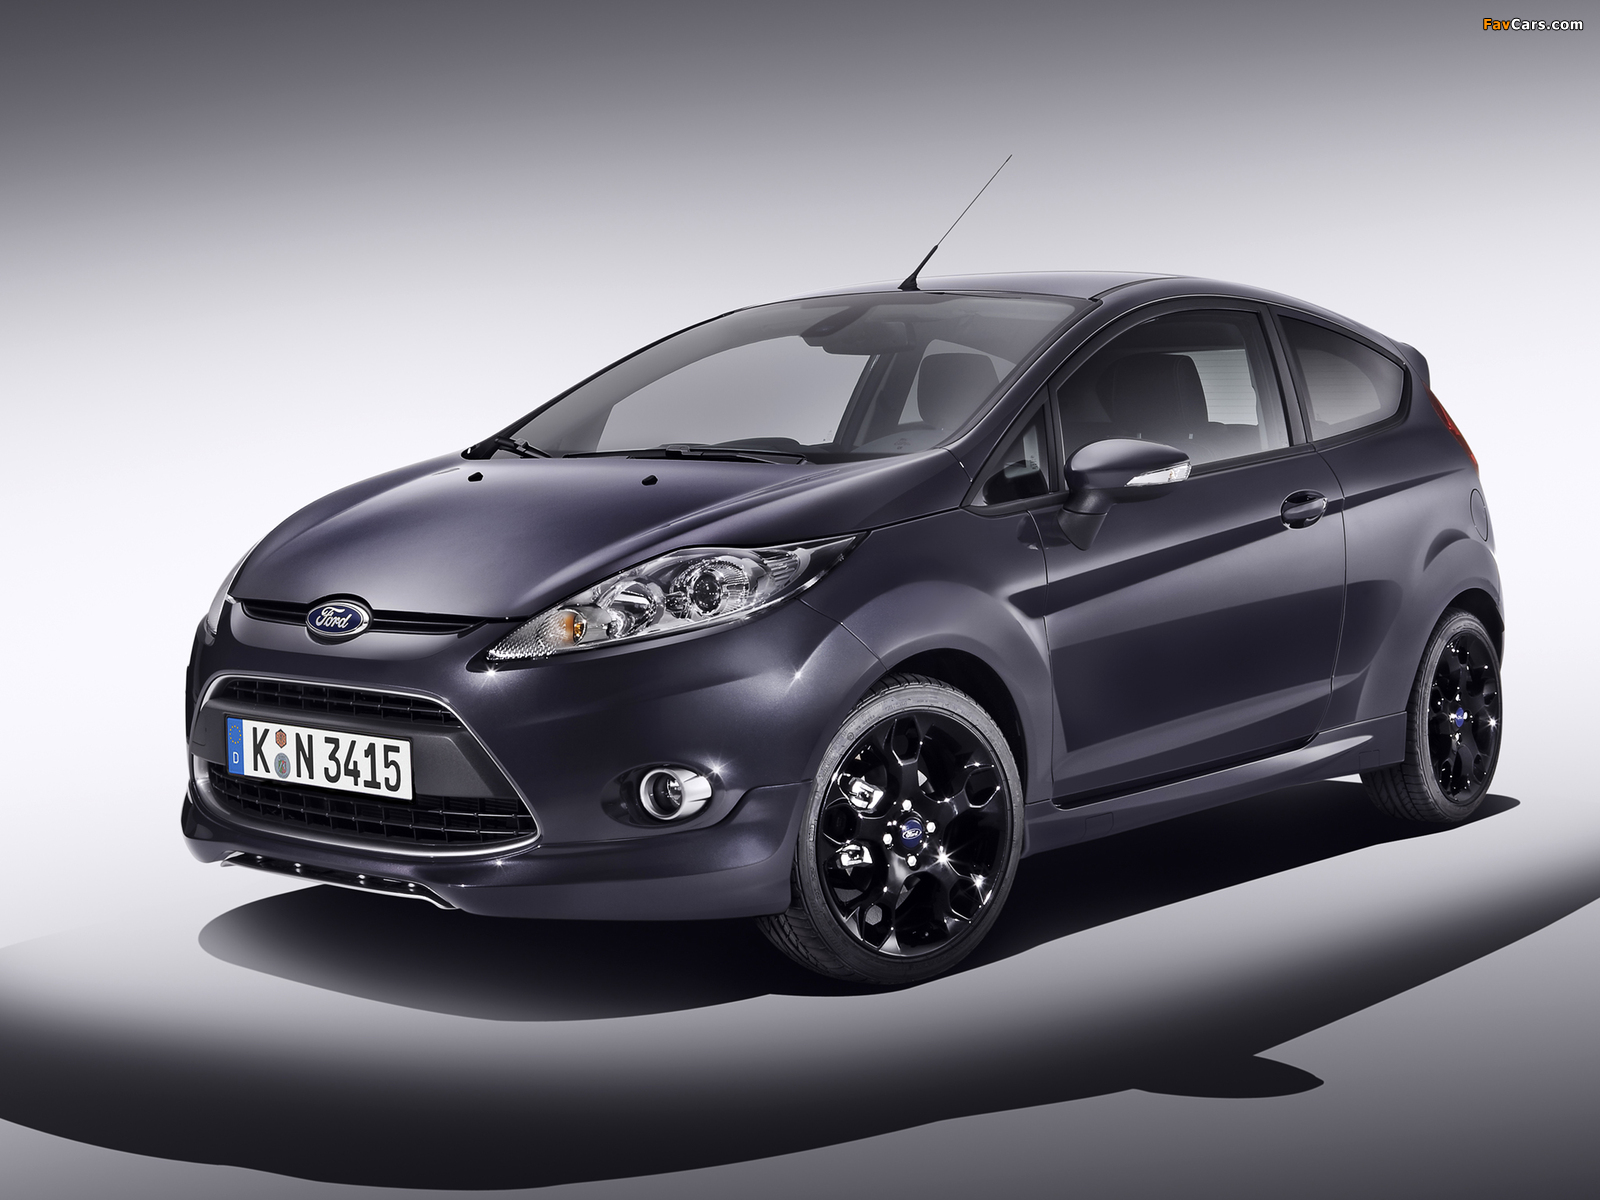 Ford Fiesta Sport Special Edition 2011 pictures (1600 x 1200)